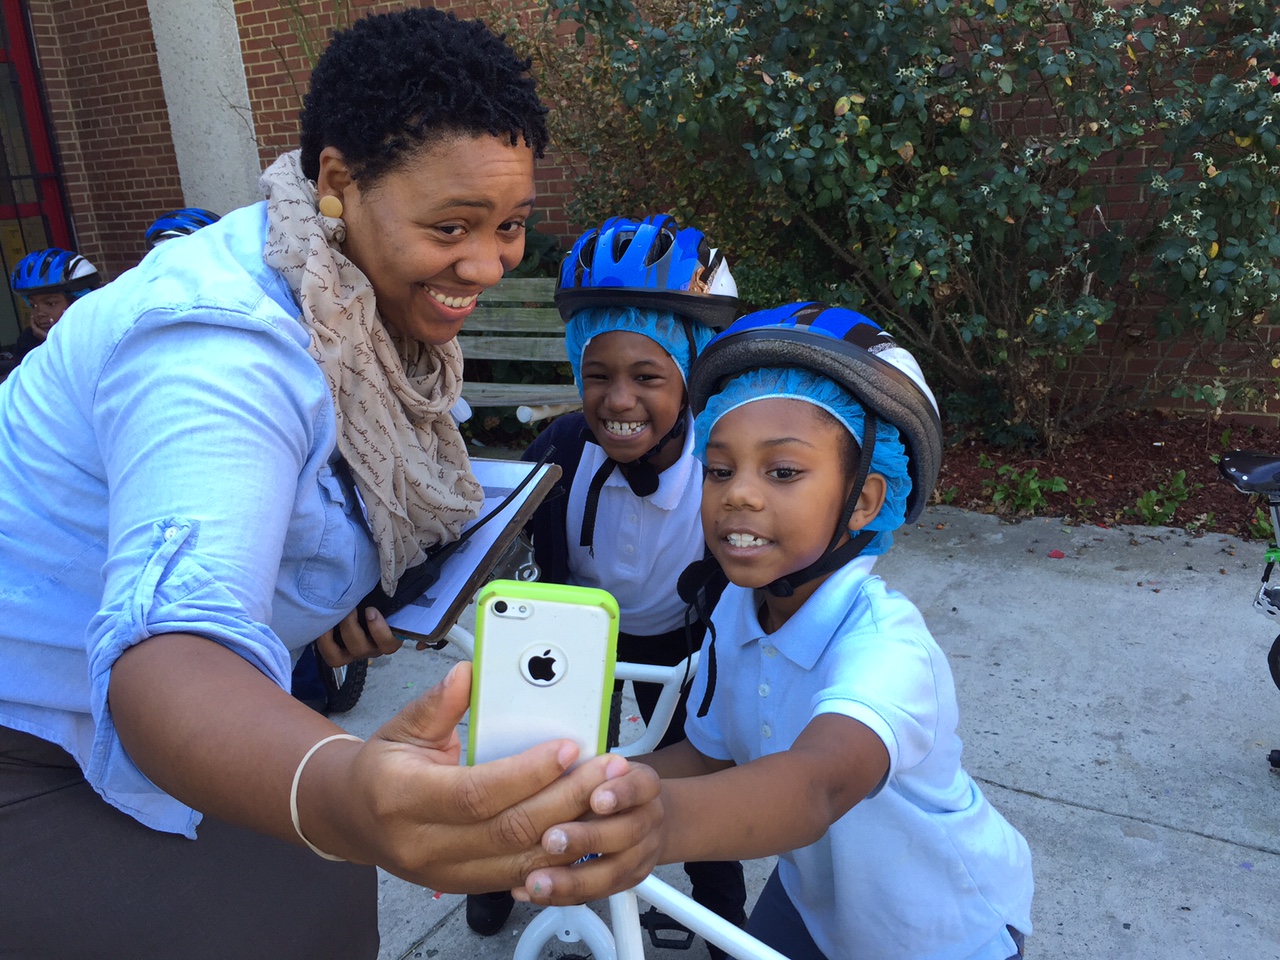 CW Harris Elementary School principal Heather Hairston takes a selfie with students before they ride. (WTOP/Kate Ryan)